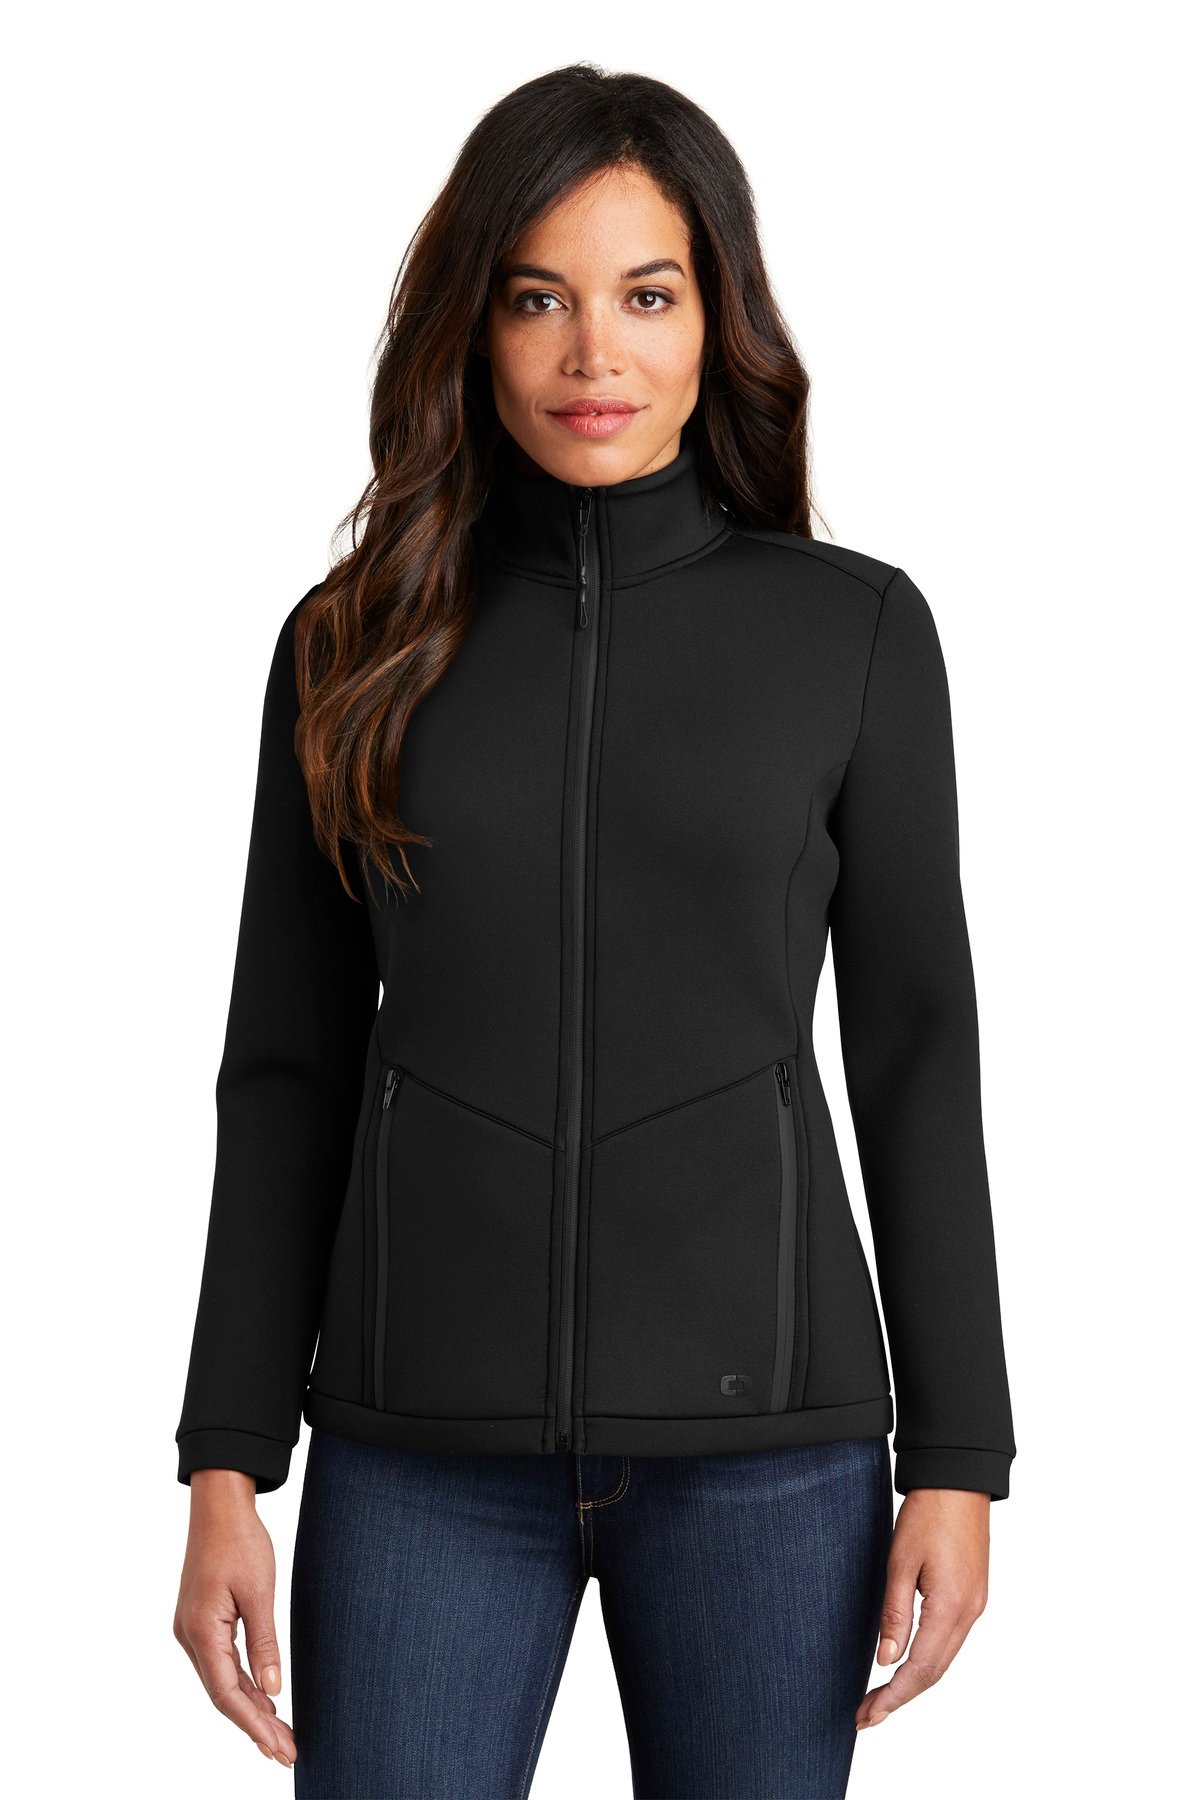 Front view of Ladies Axis Bonded Jacket